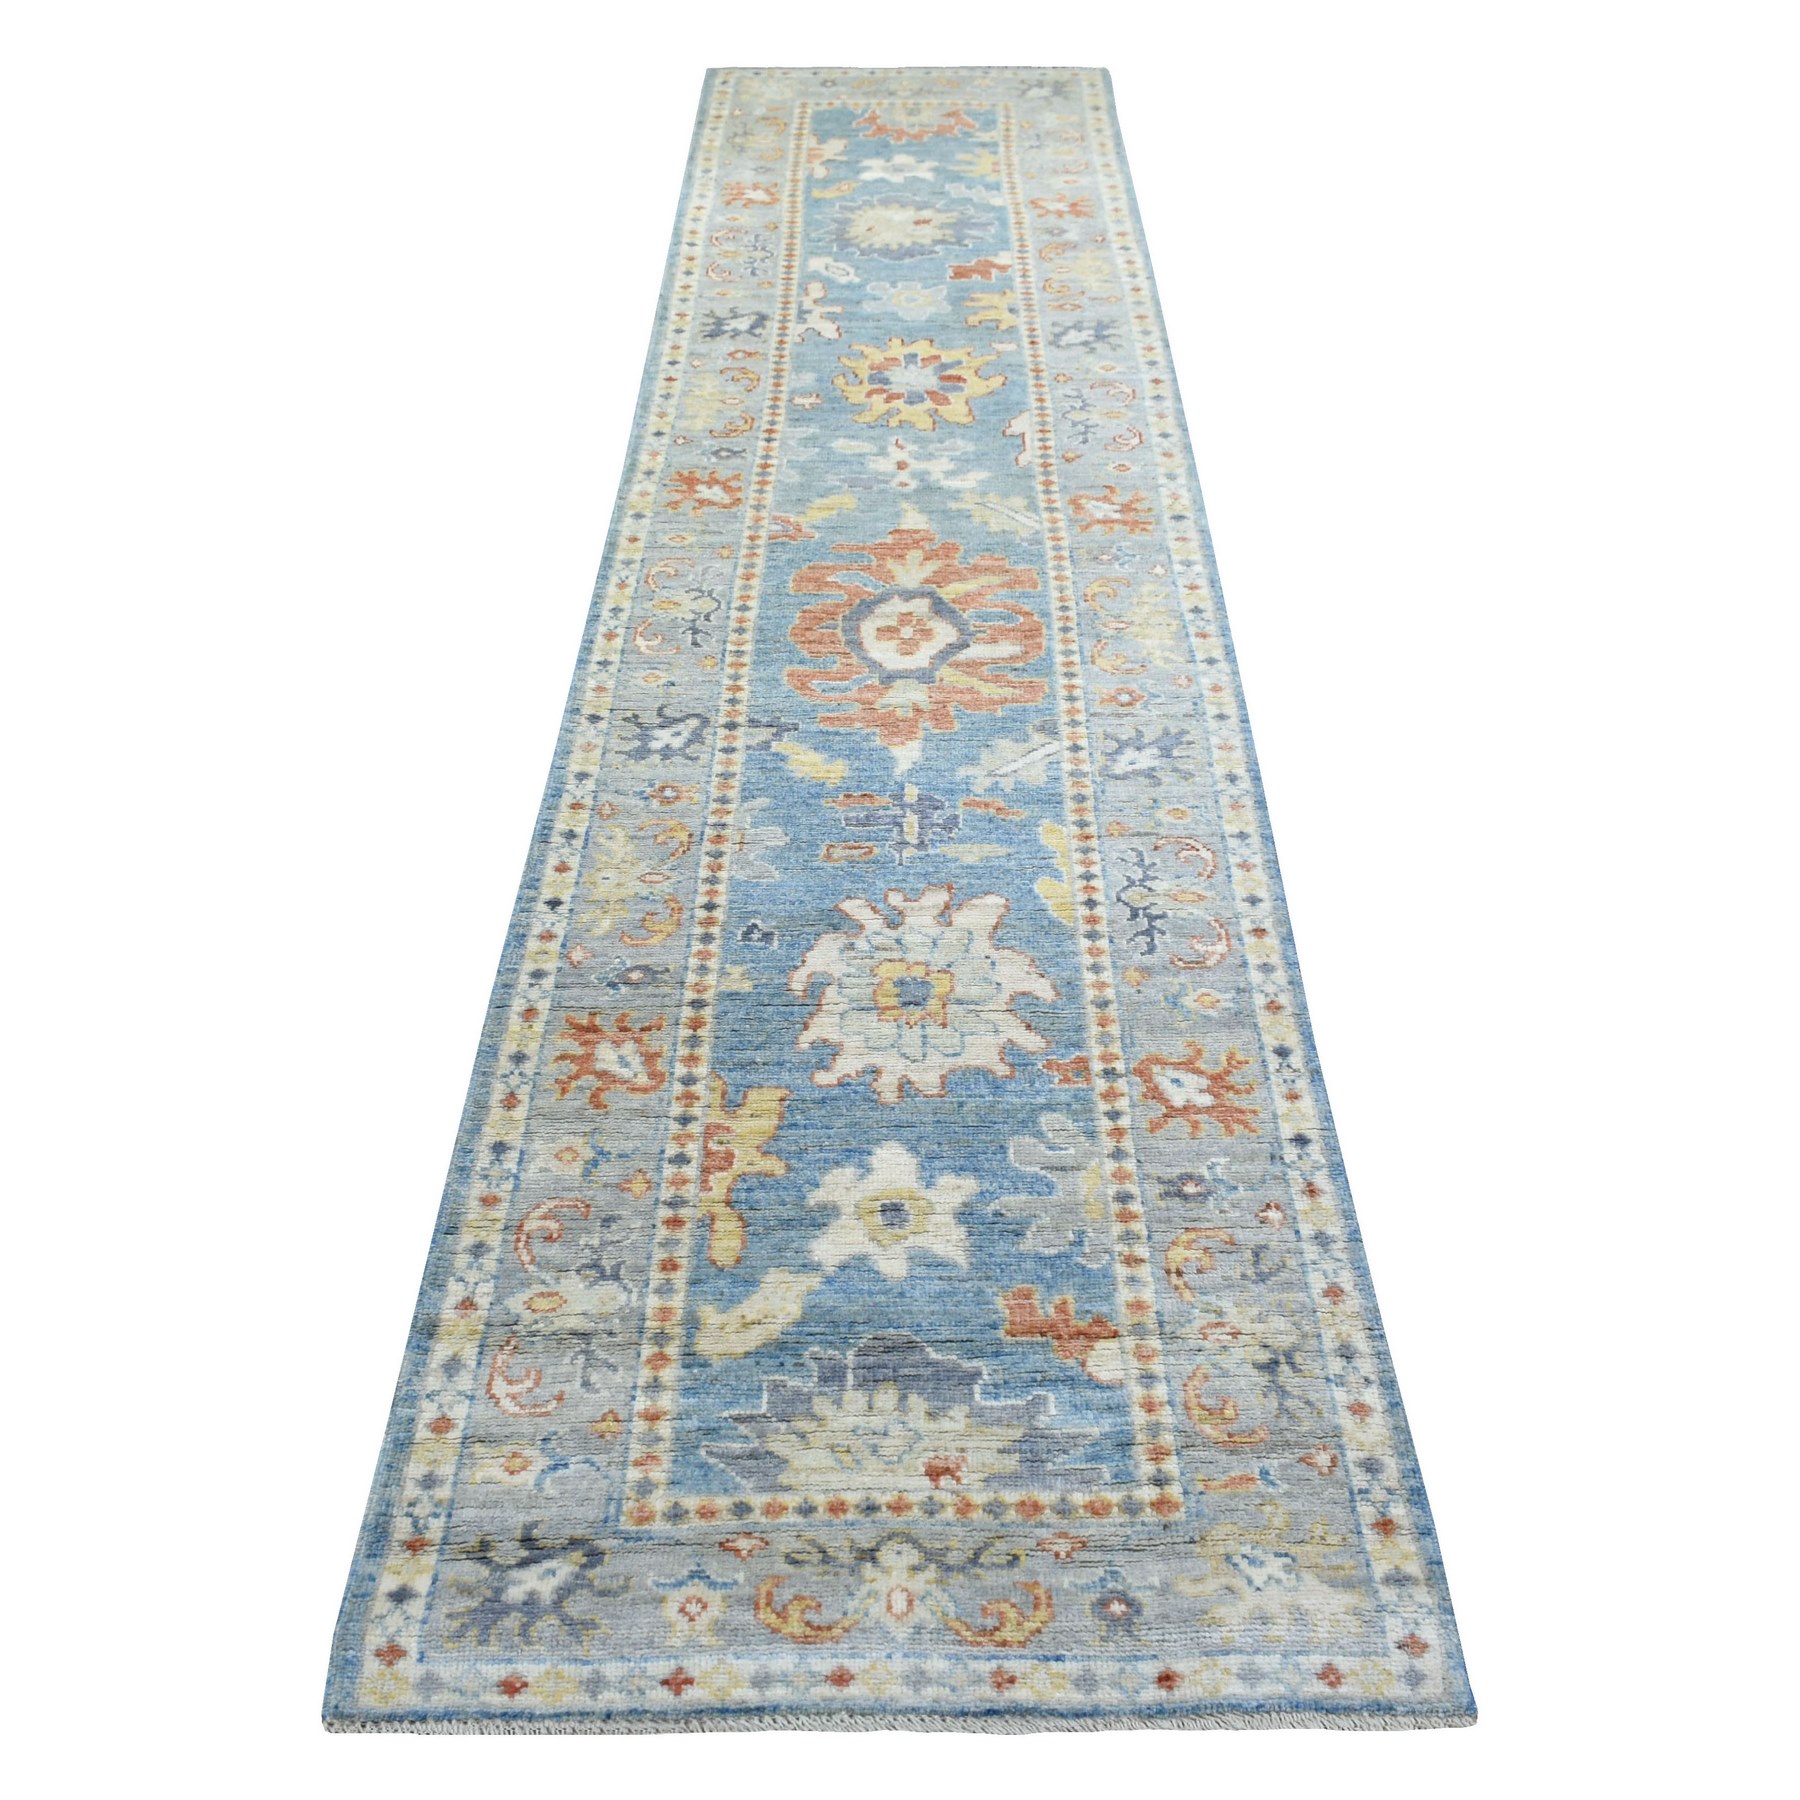 2'8"x11'6" Denim Blue Afghan Angora Oushak with Colorful Leaf Design Hand Woven Pure Wool Oriental Runner Rug 